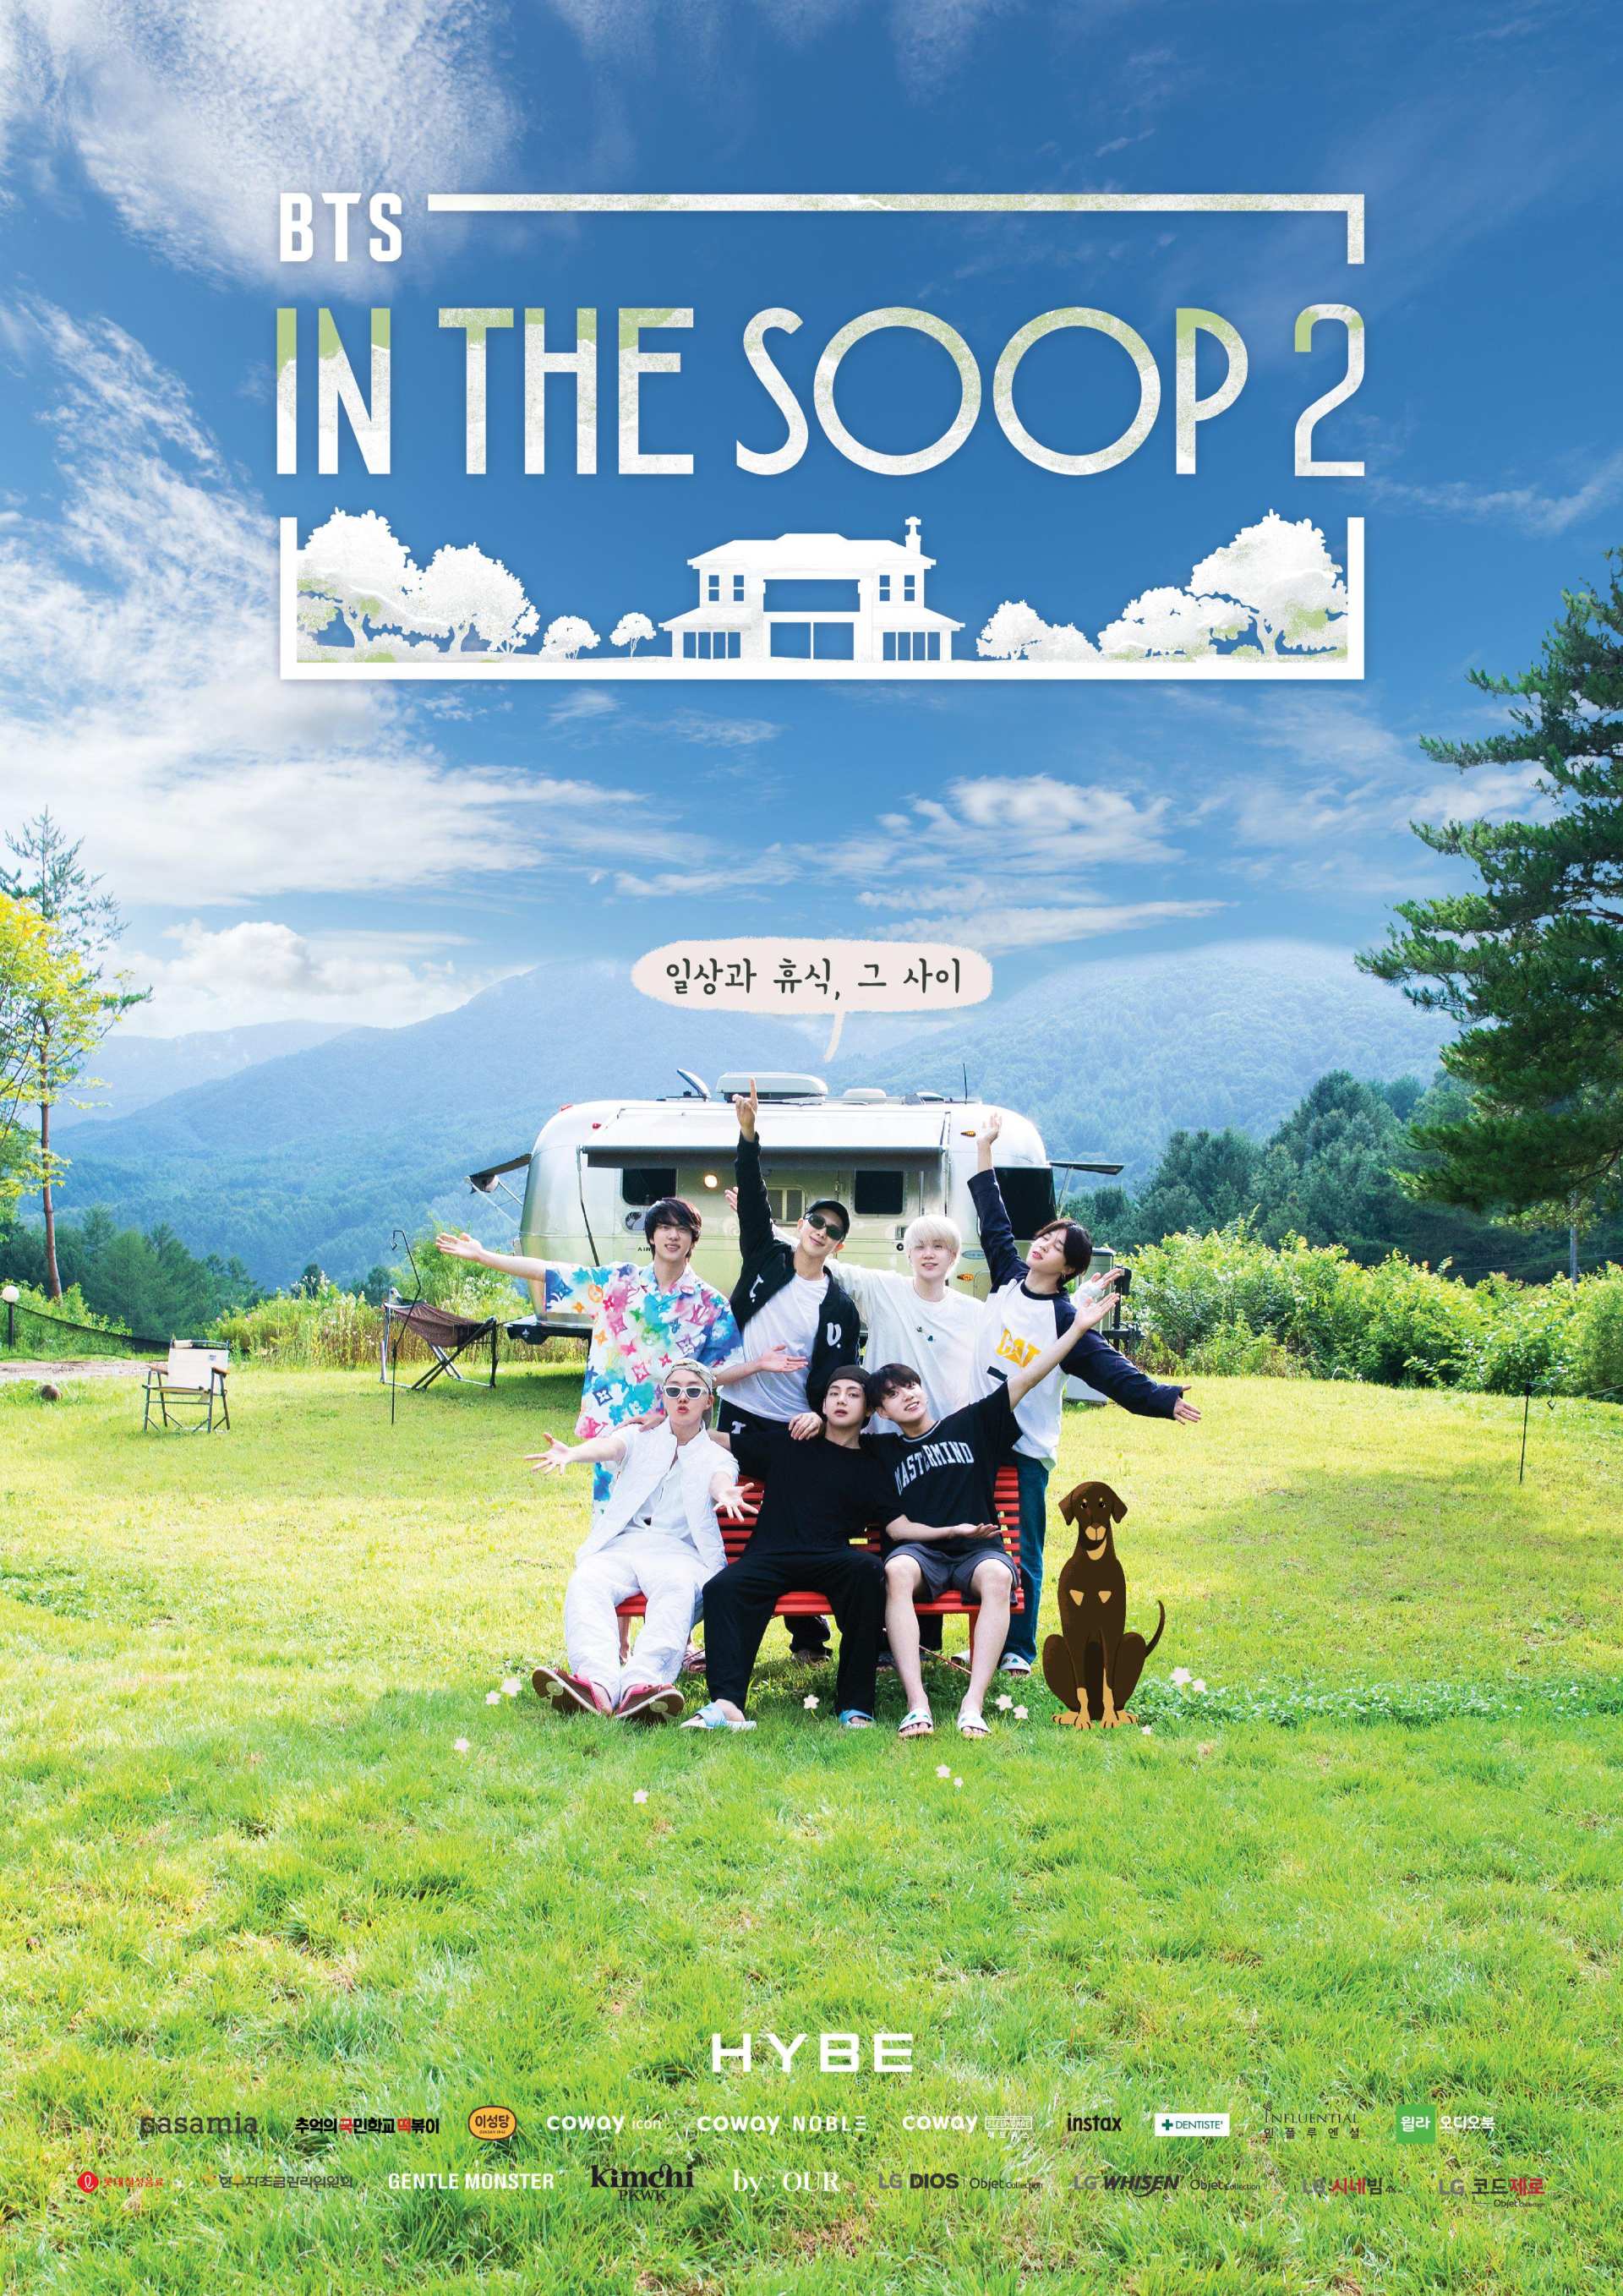 BTS In The Soop Stay 平昌ホテル限定トレカ　グク